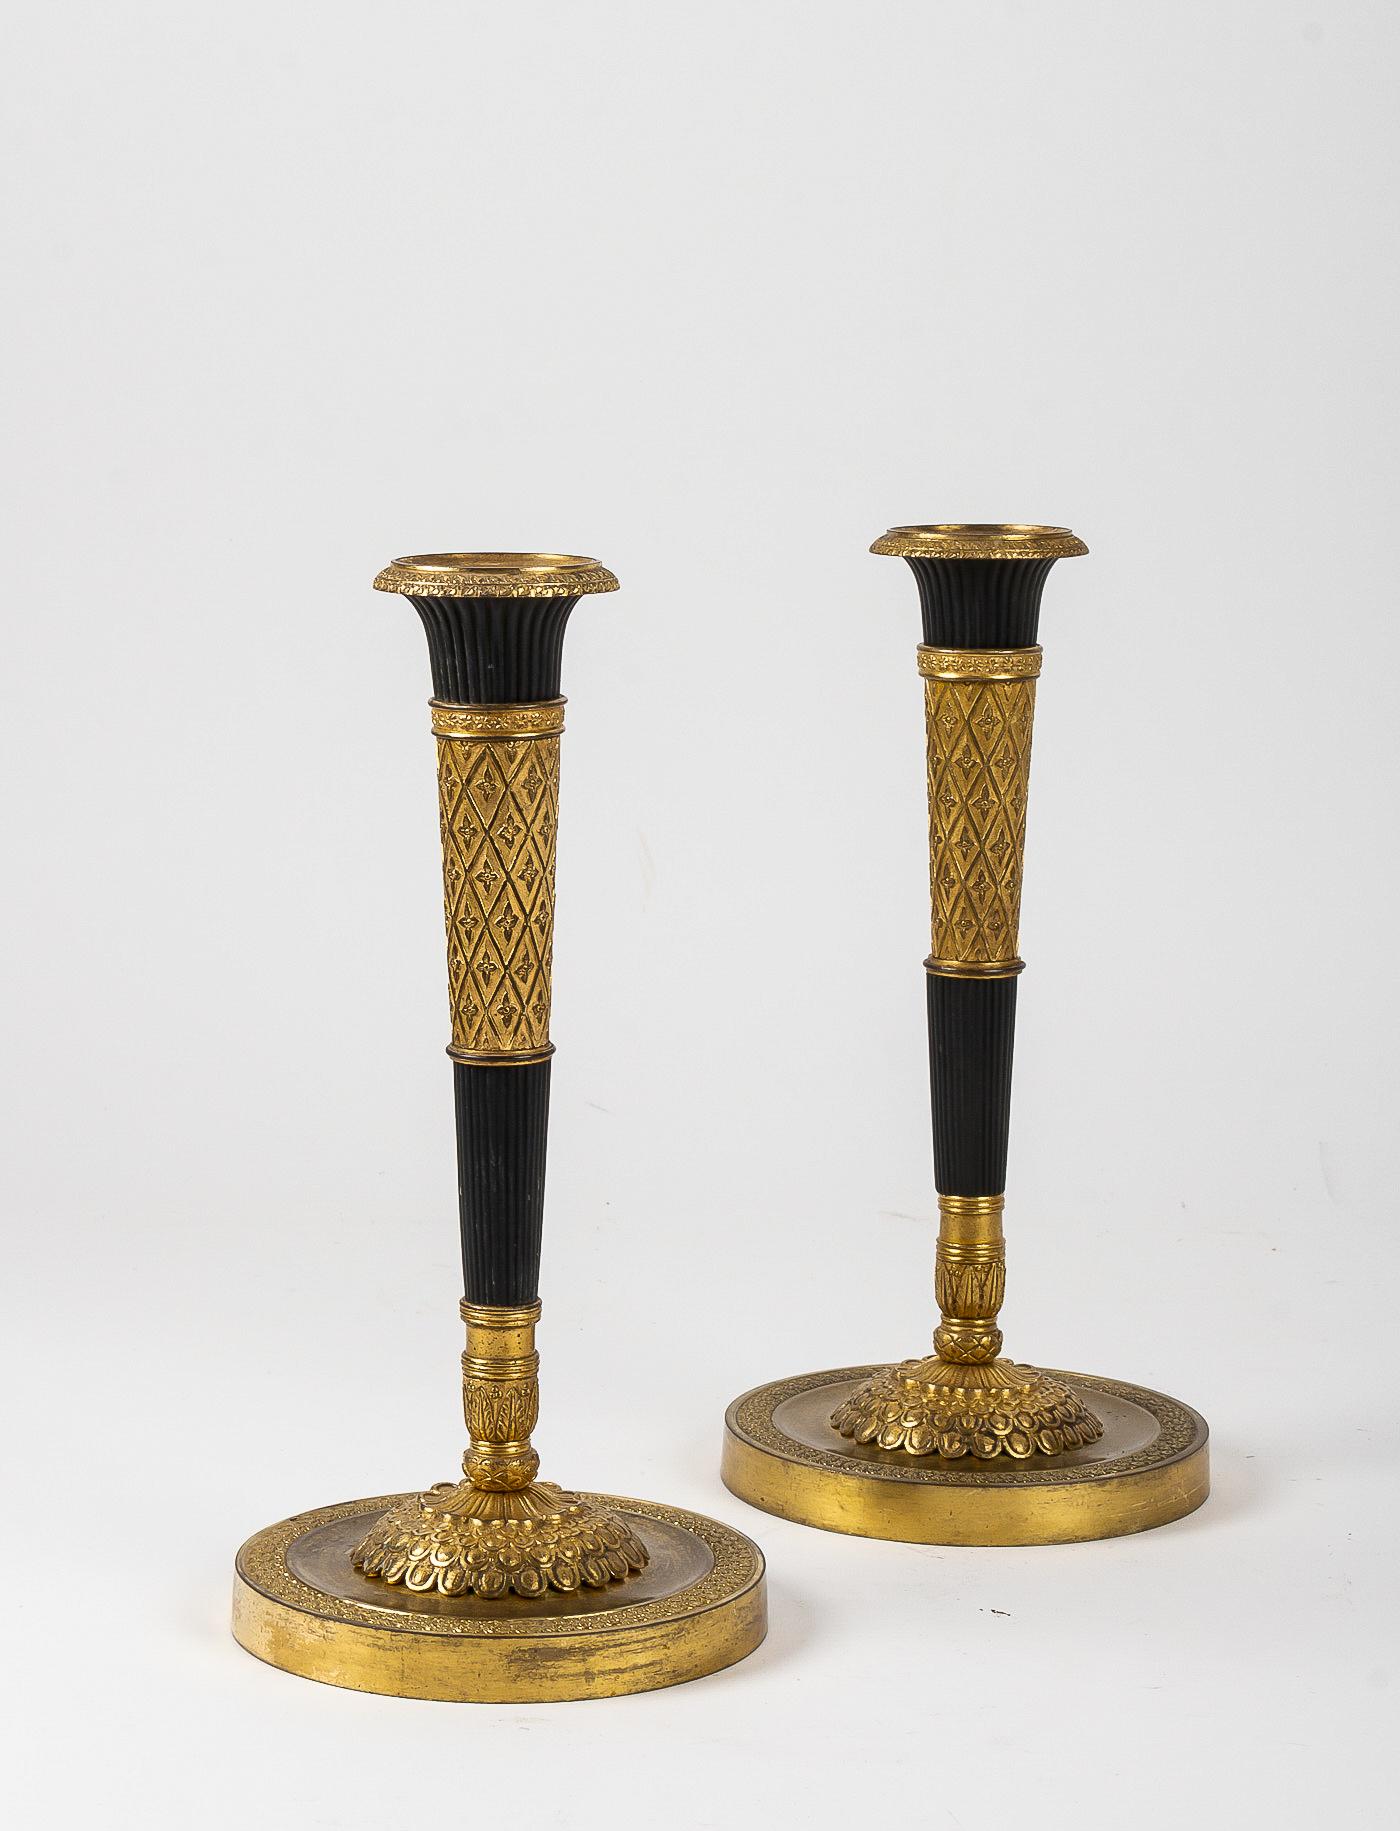 Gilt French Directoire Period Pair of French Candlesticks, circa 1798 For Sale